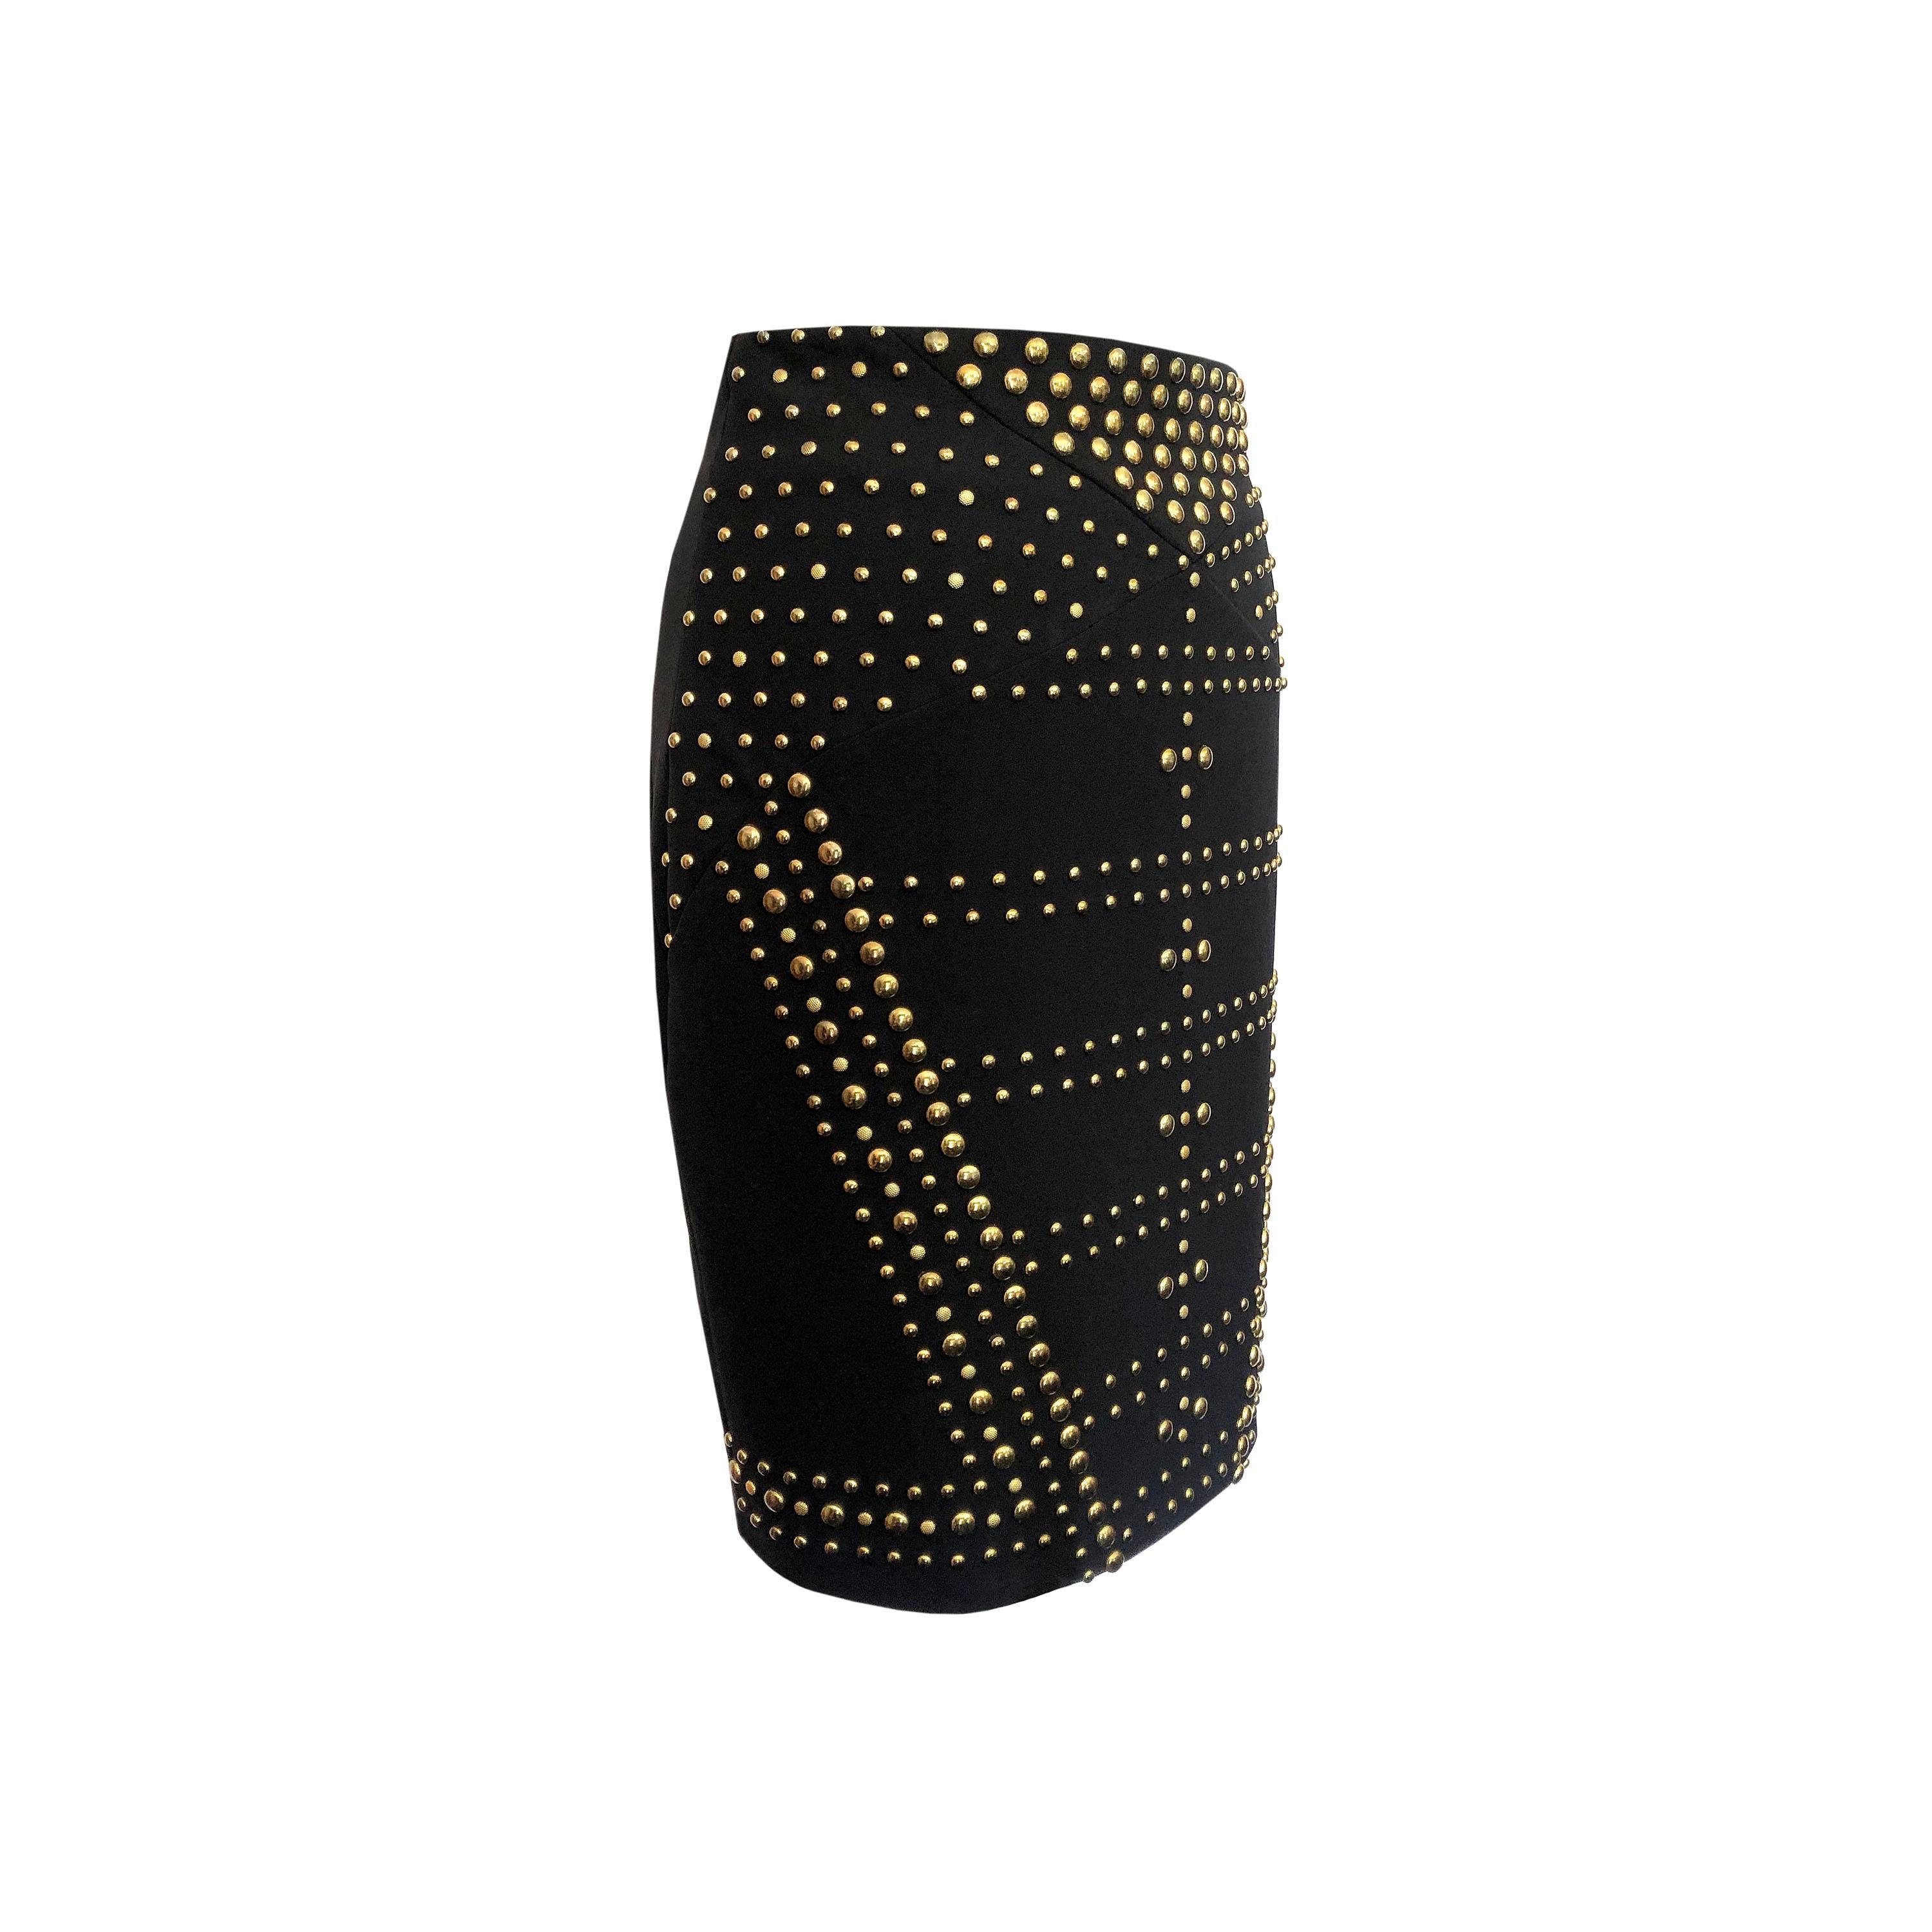 Product Details: Versace Skirt - Black Stretch Viscose + Brass Stud Detailing - Fully Lined - 'Versace Medusa' Logo Mirror Tag + Zipper Fasten / Back Skirt - Back Panel Detailing
Label: Versace Collection
Size: IT 42 (Fits UK 8 to UK 12)
Fabric